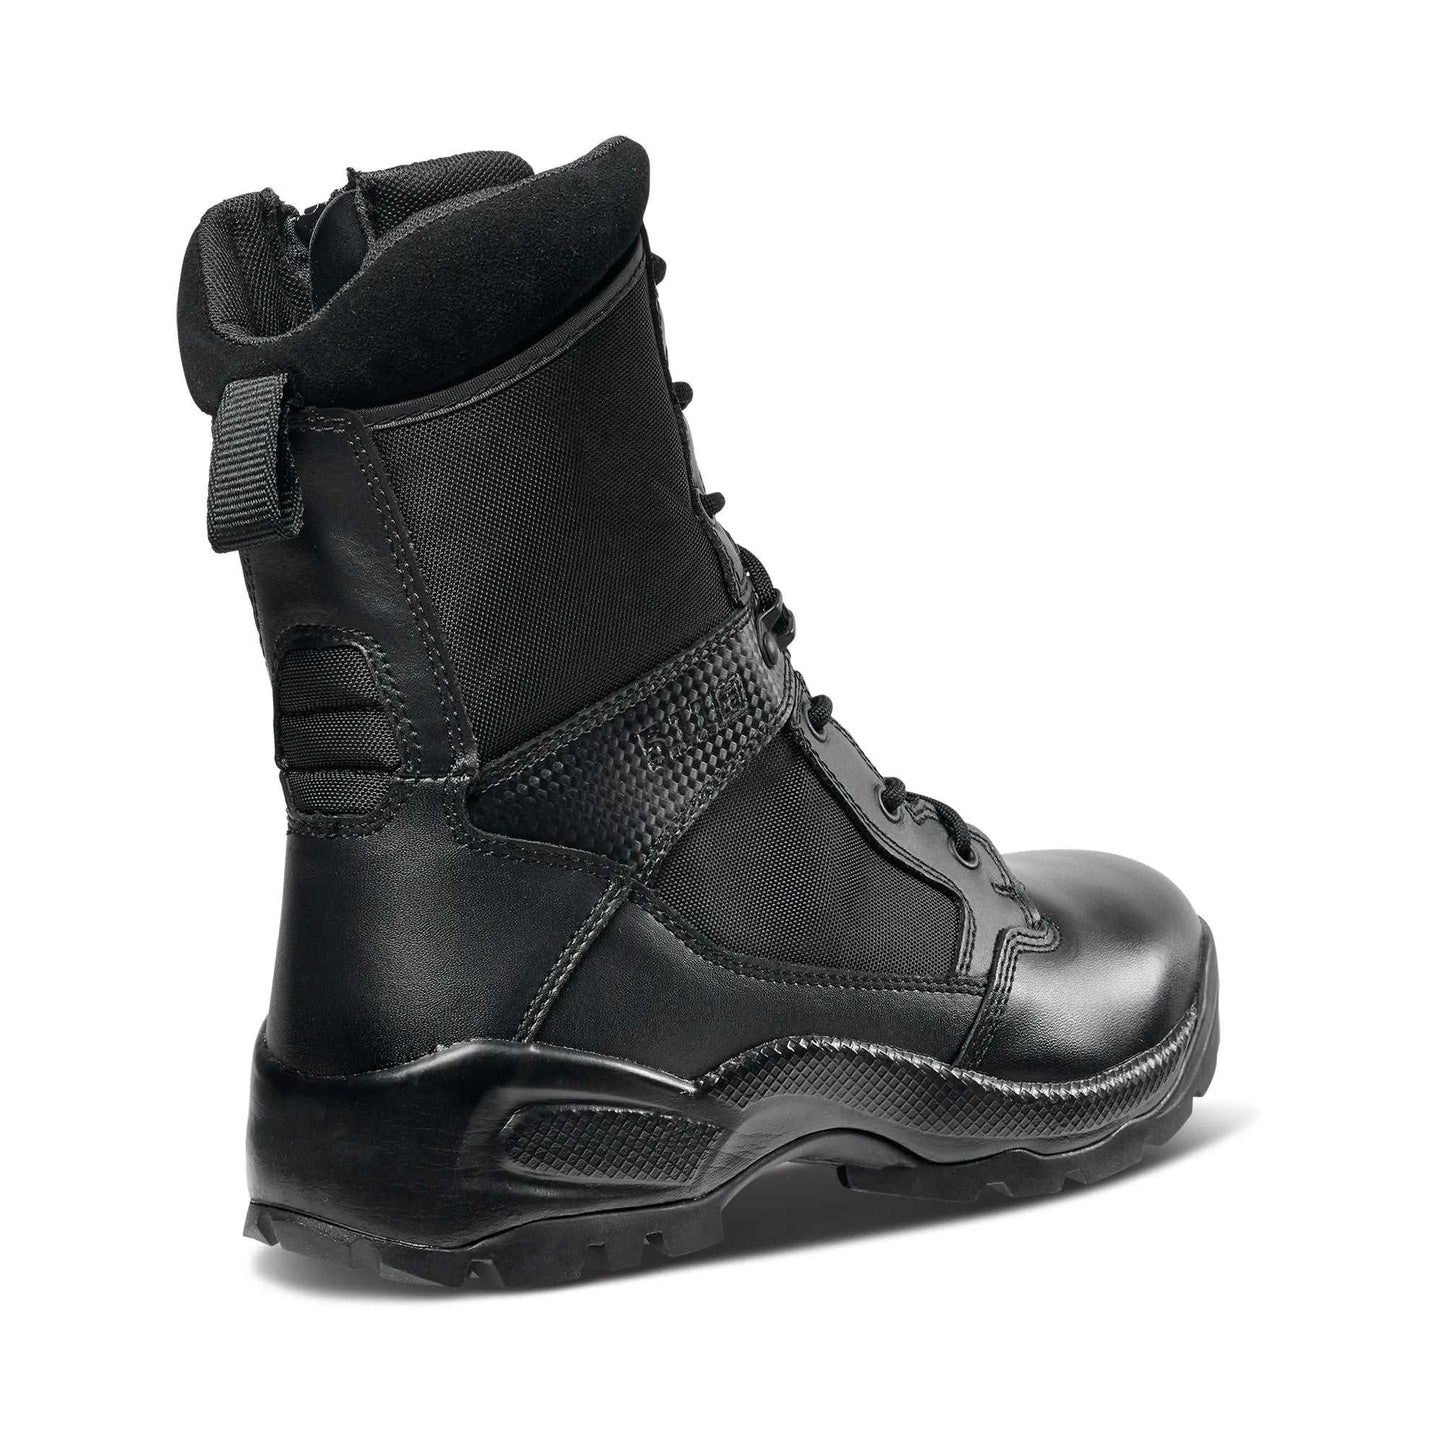 Boots - 5.11 Tactical A.T.A.C. 2.0 Side-Zip 8" Boots